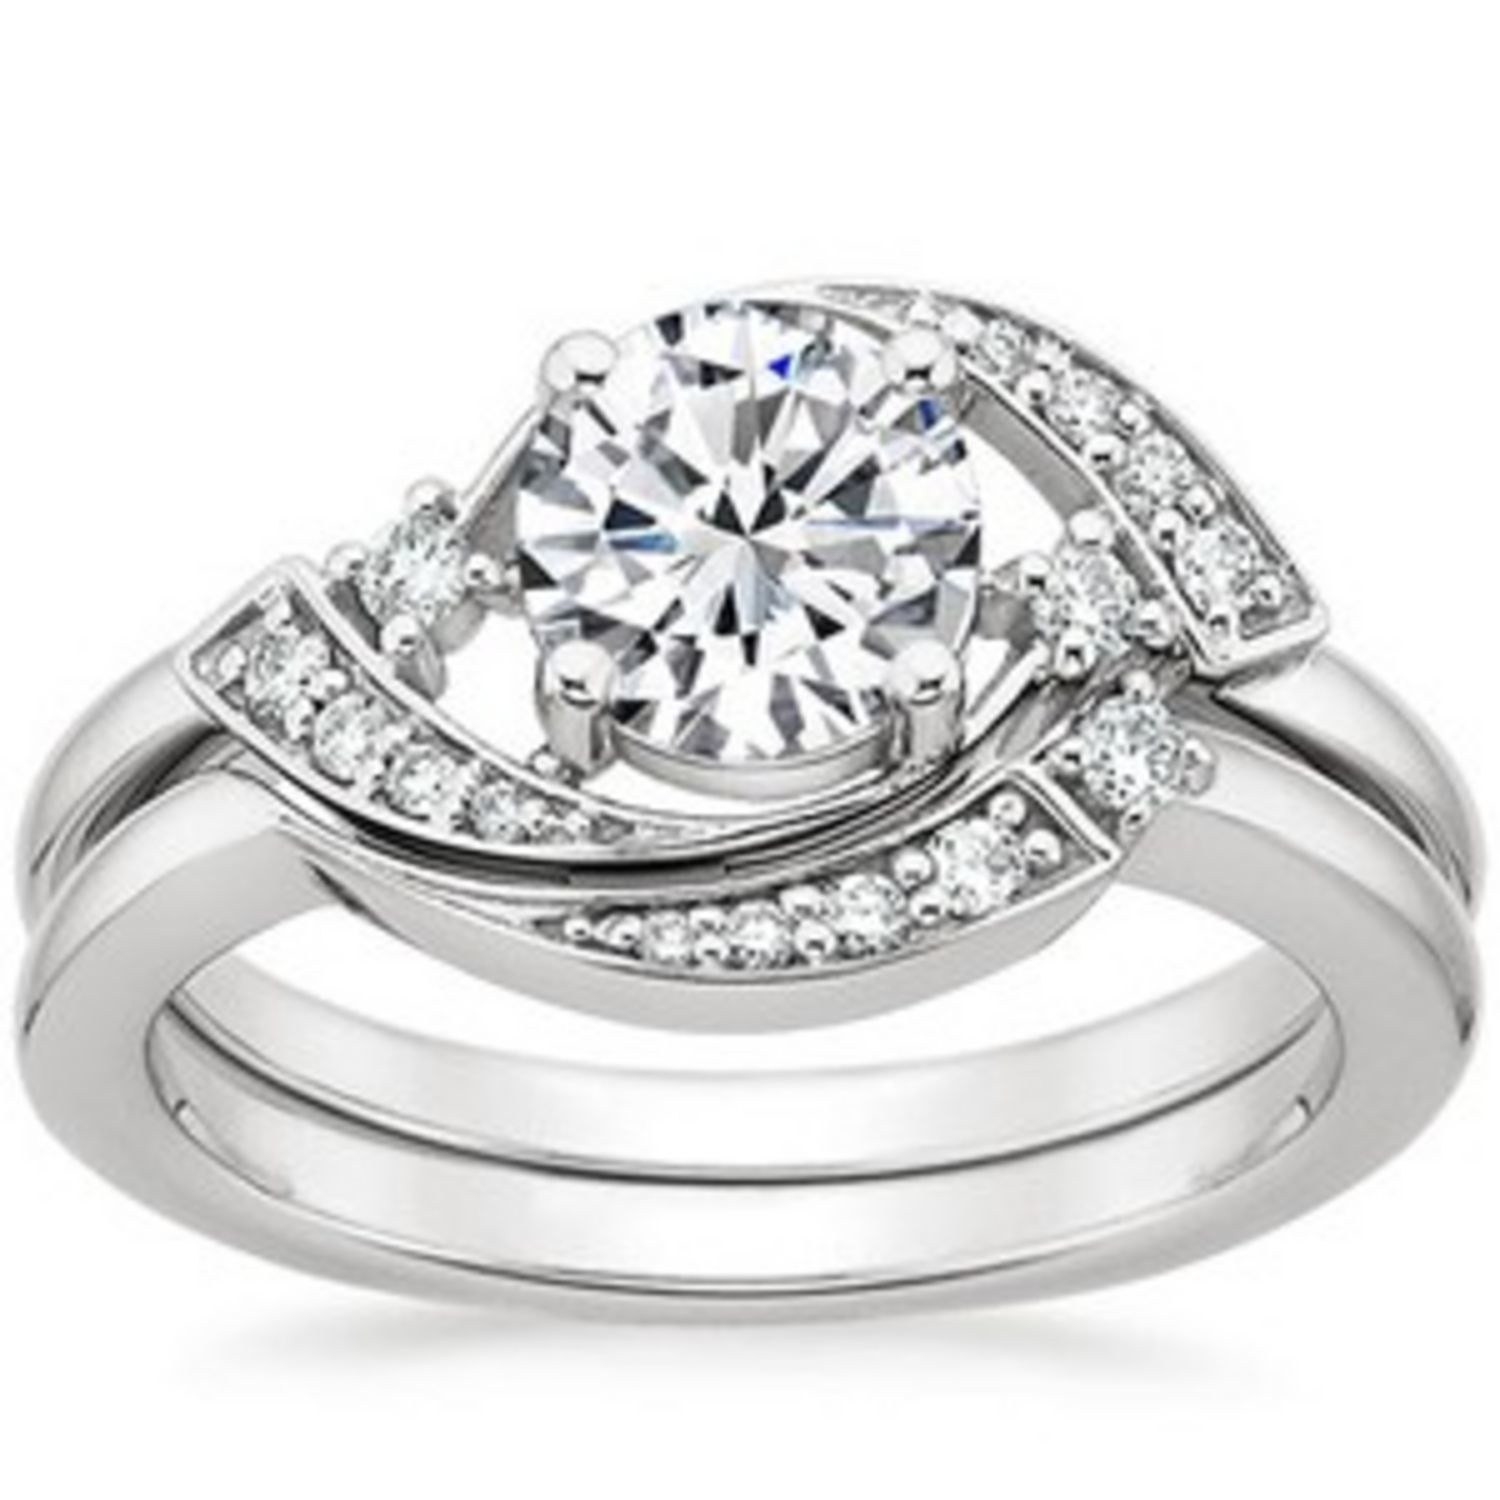 Conflict Free Diamond Engagement Rings
 Conflict Free Diamond Engagement Rings Retro Inspired